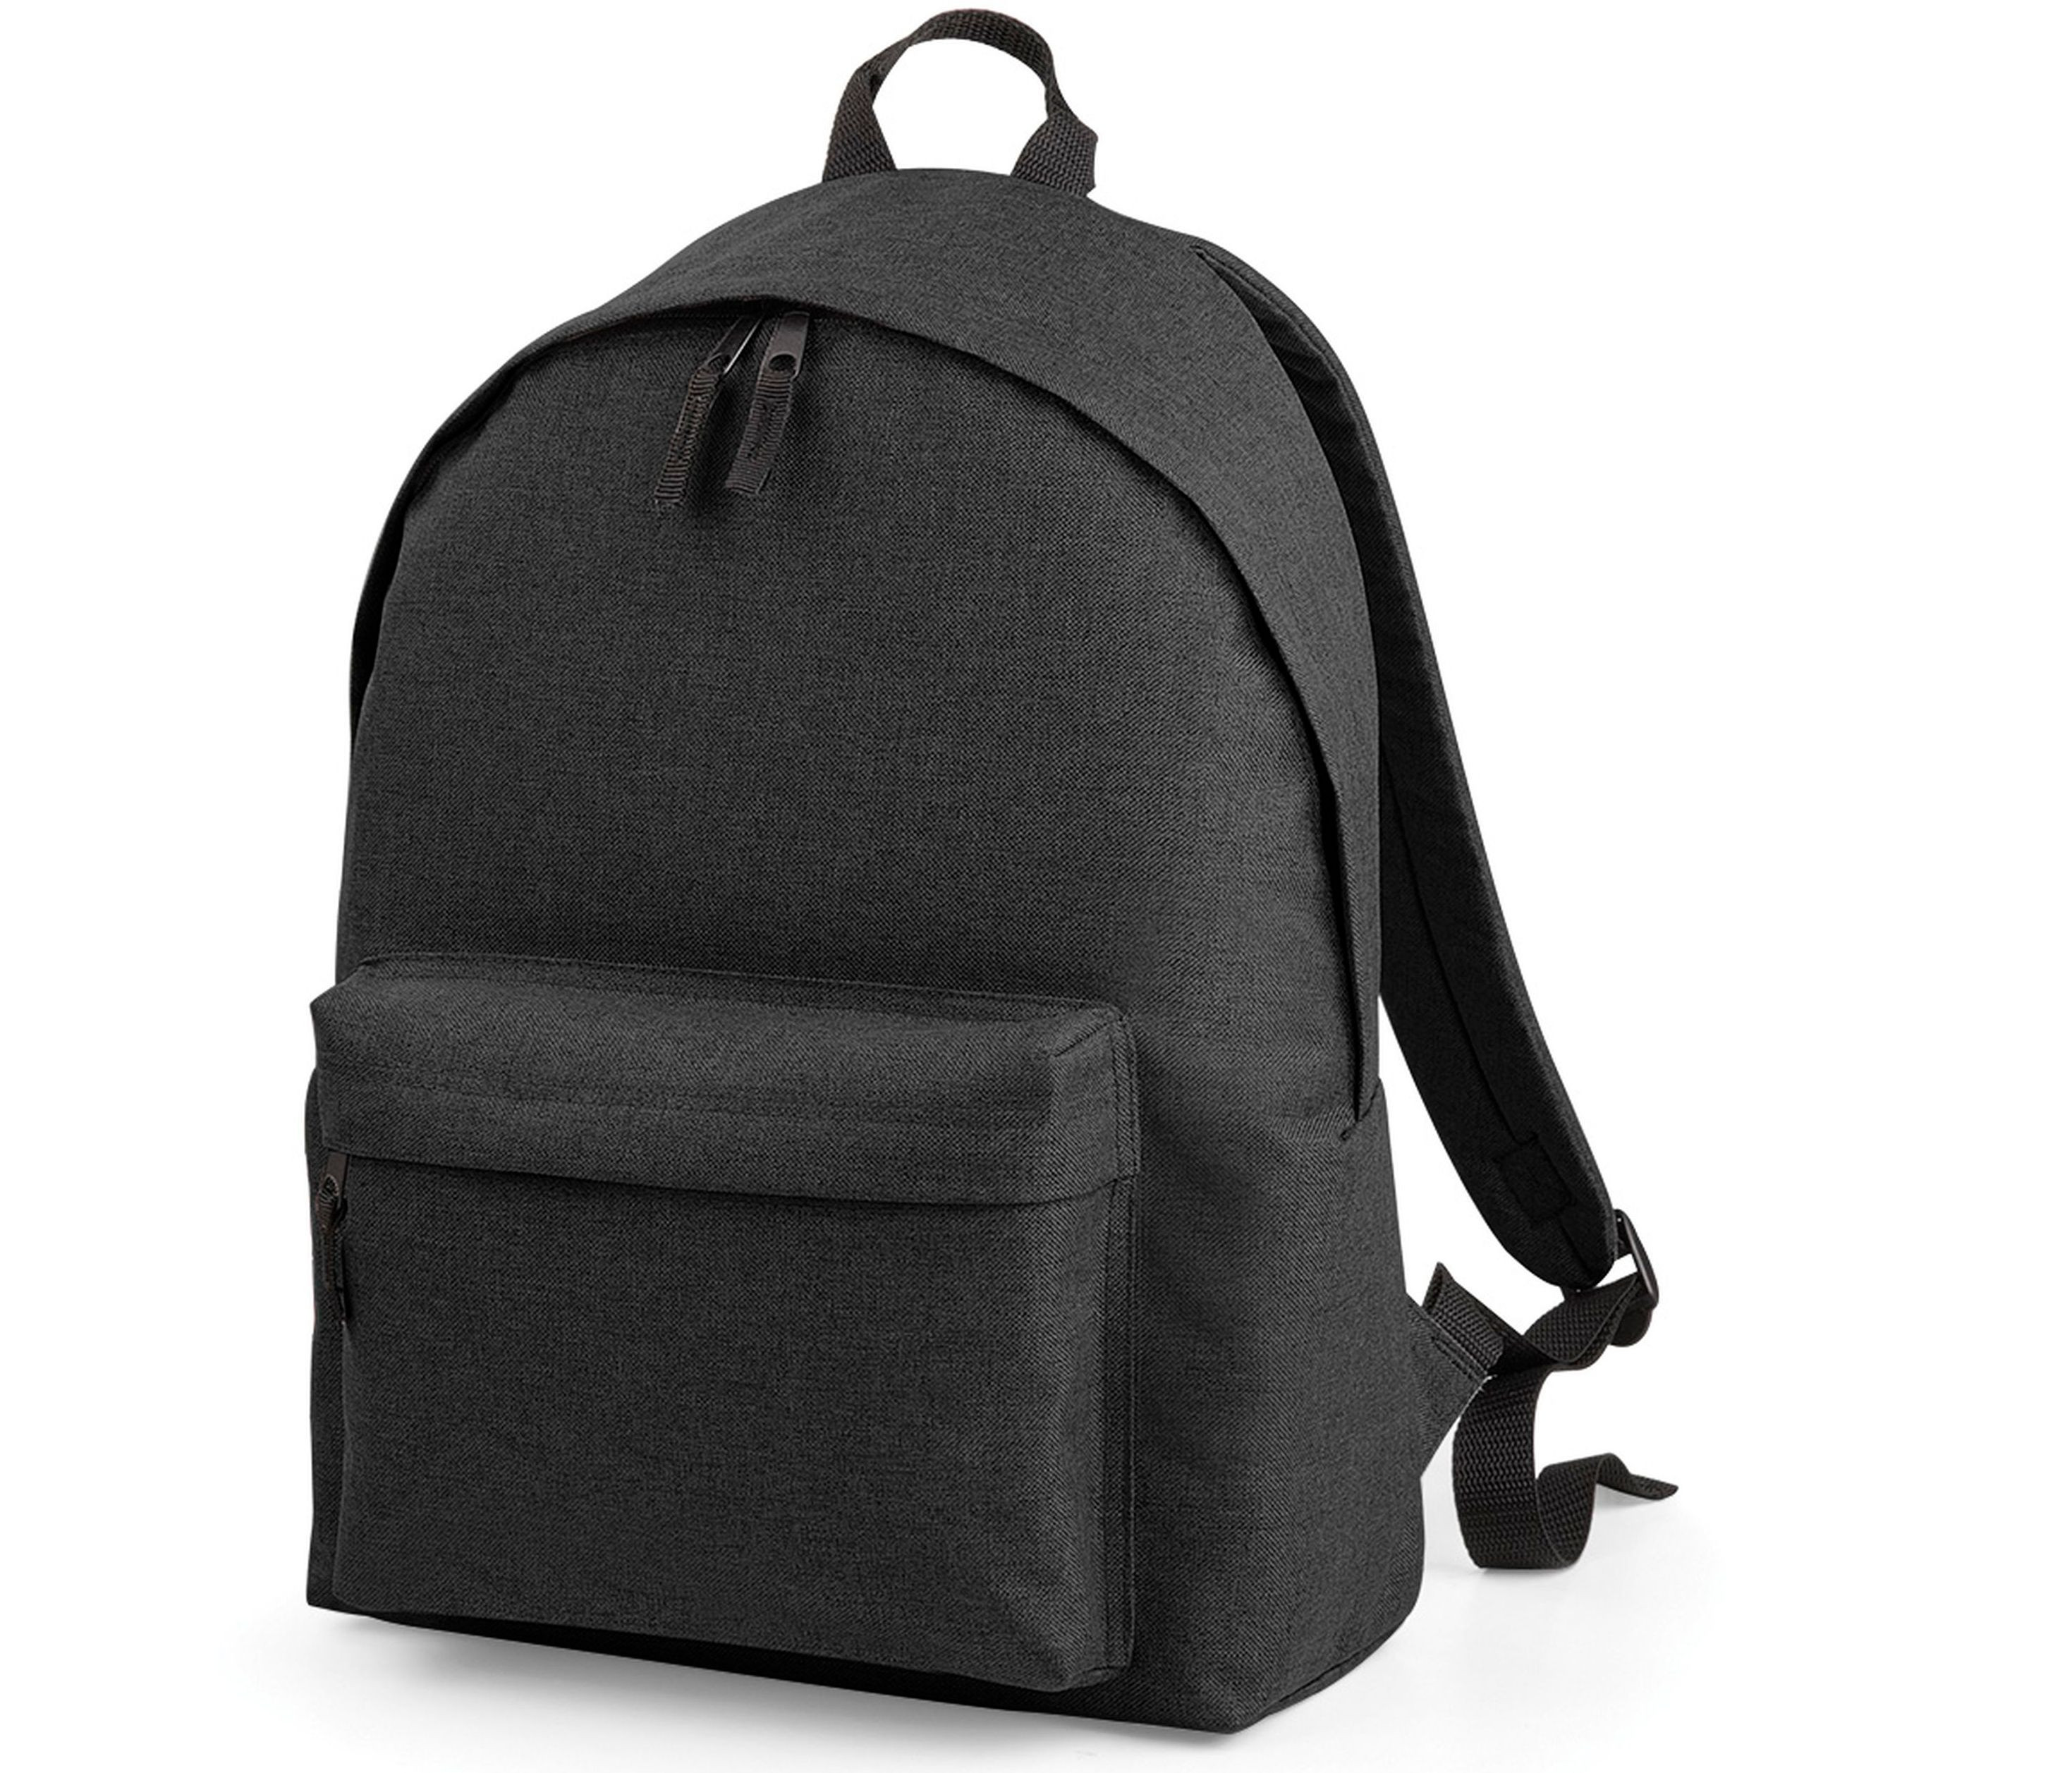 Bagbase BG126 - Trendy 2-tone backpack Size:31x21x42cm. 18 litres Colors:Anthracite